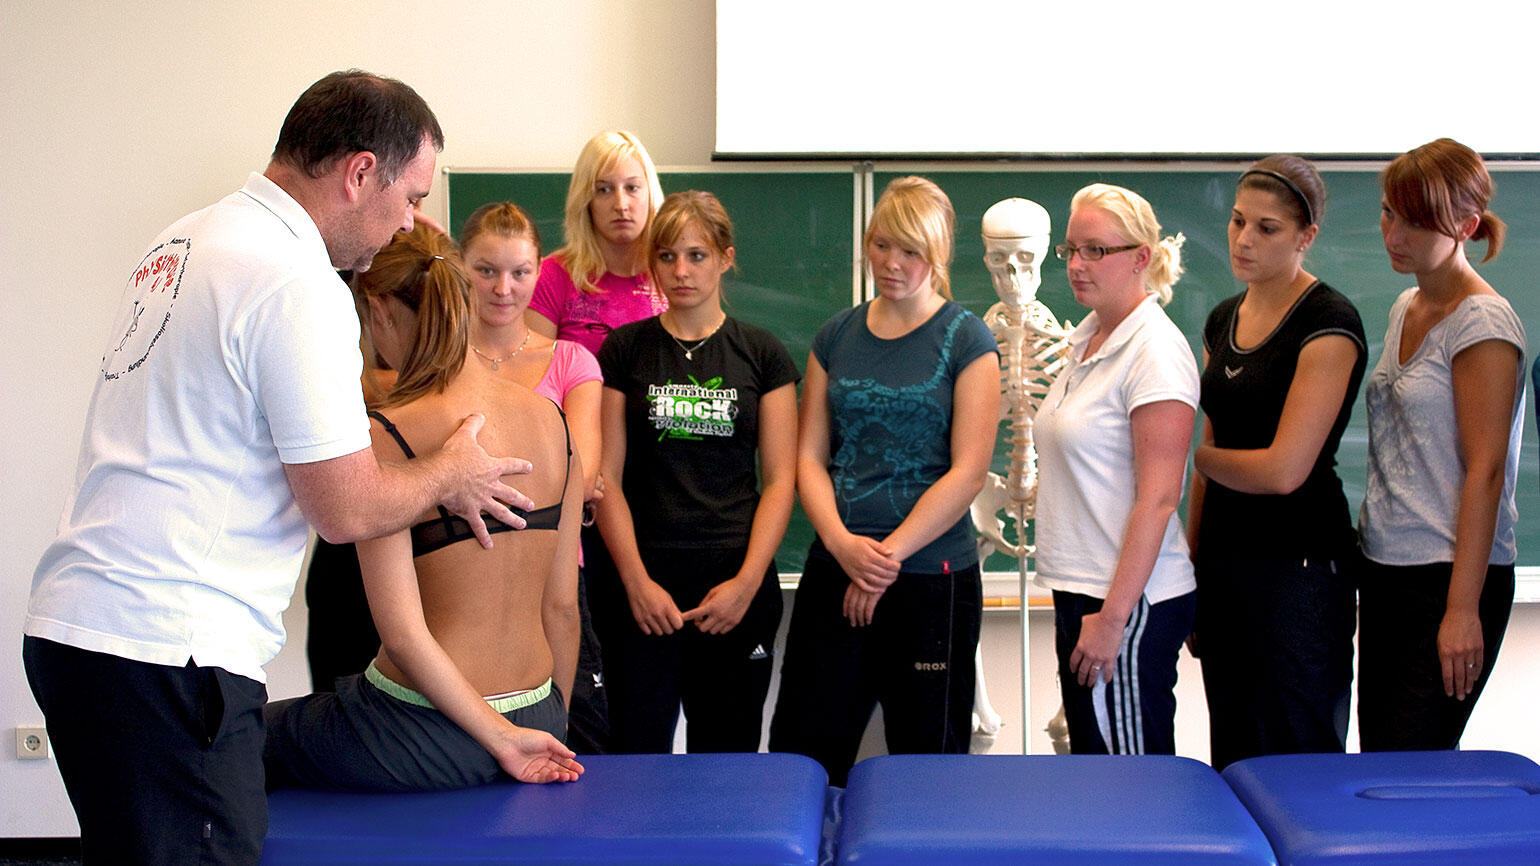 group of women observe a physiotherapist demonstrating a treatment